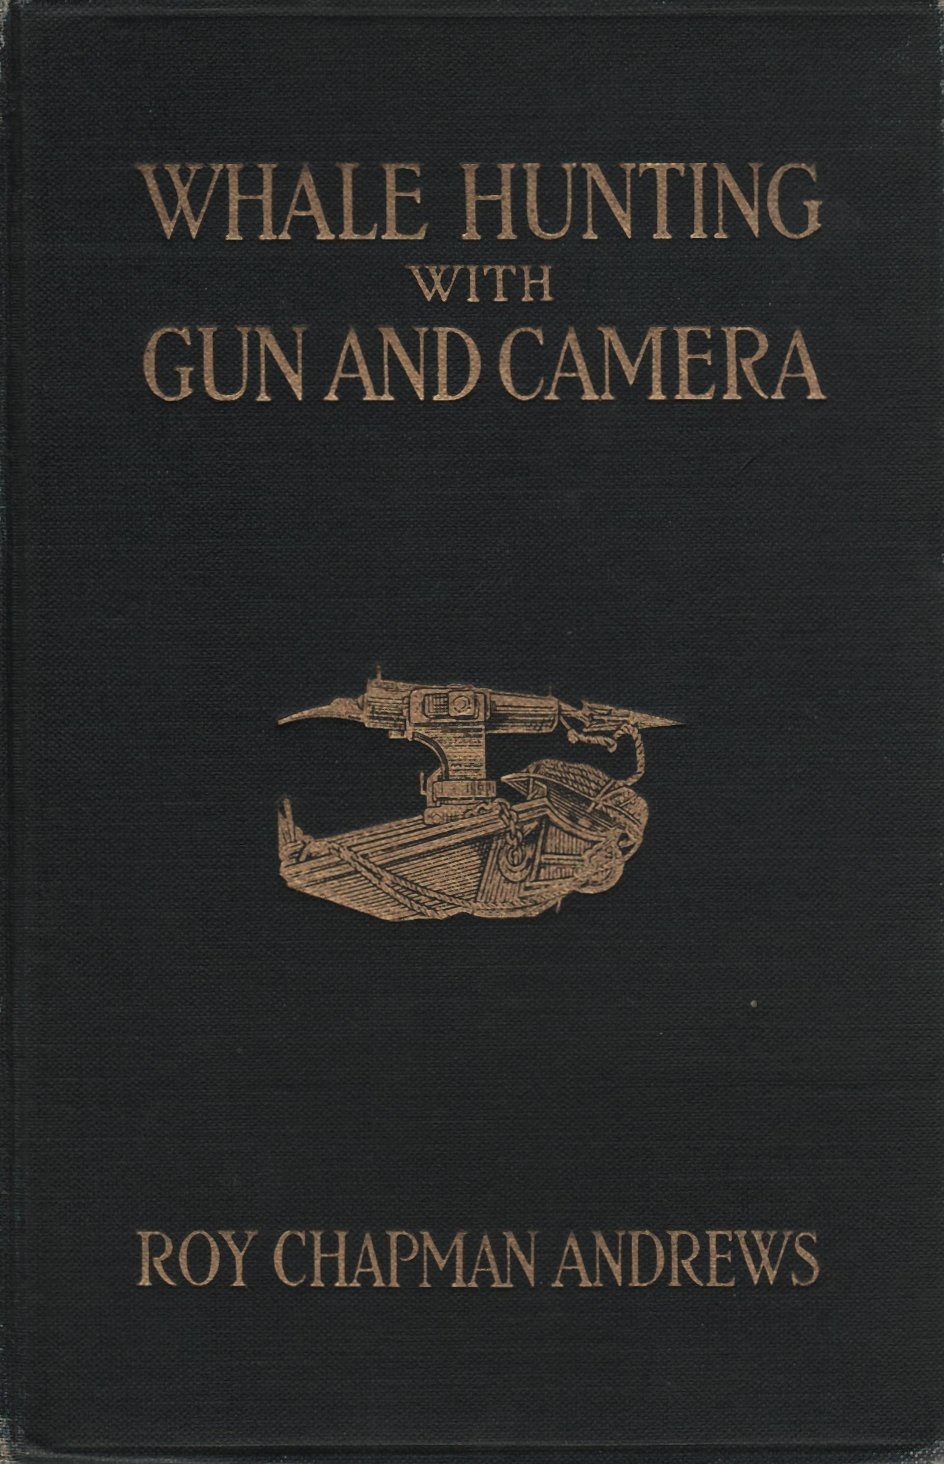 Whale Hunting with Gun and Camera - Roy Chapman Andrews | Clive Coy Collection